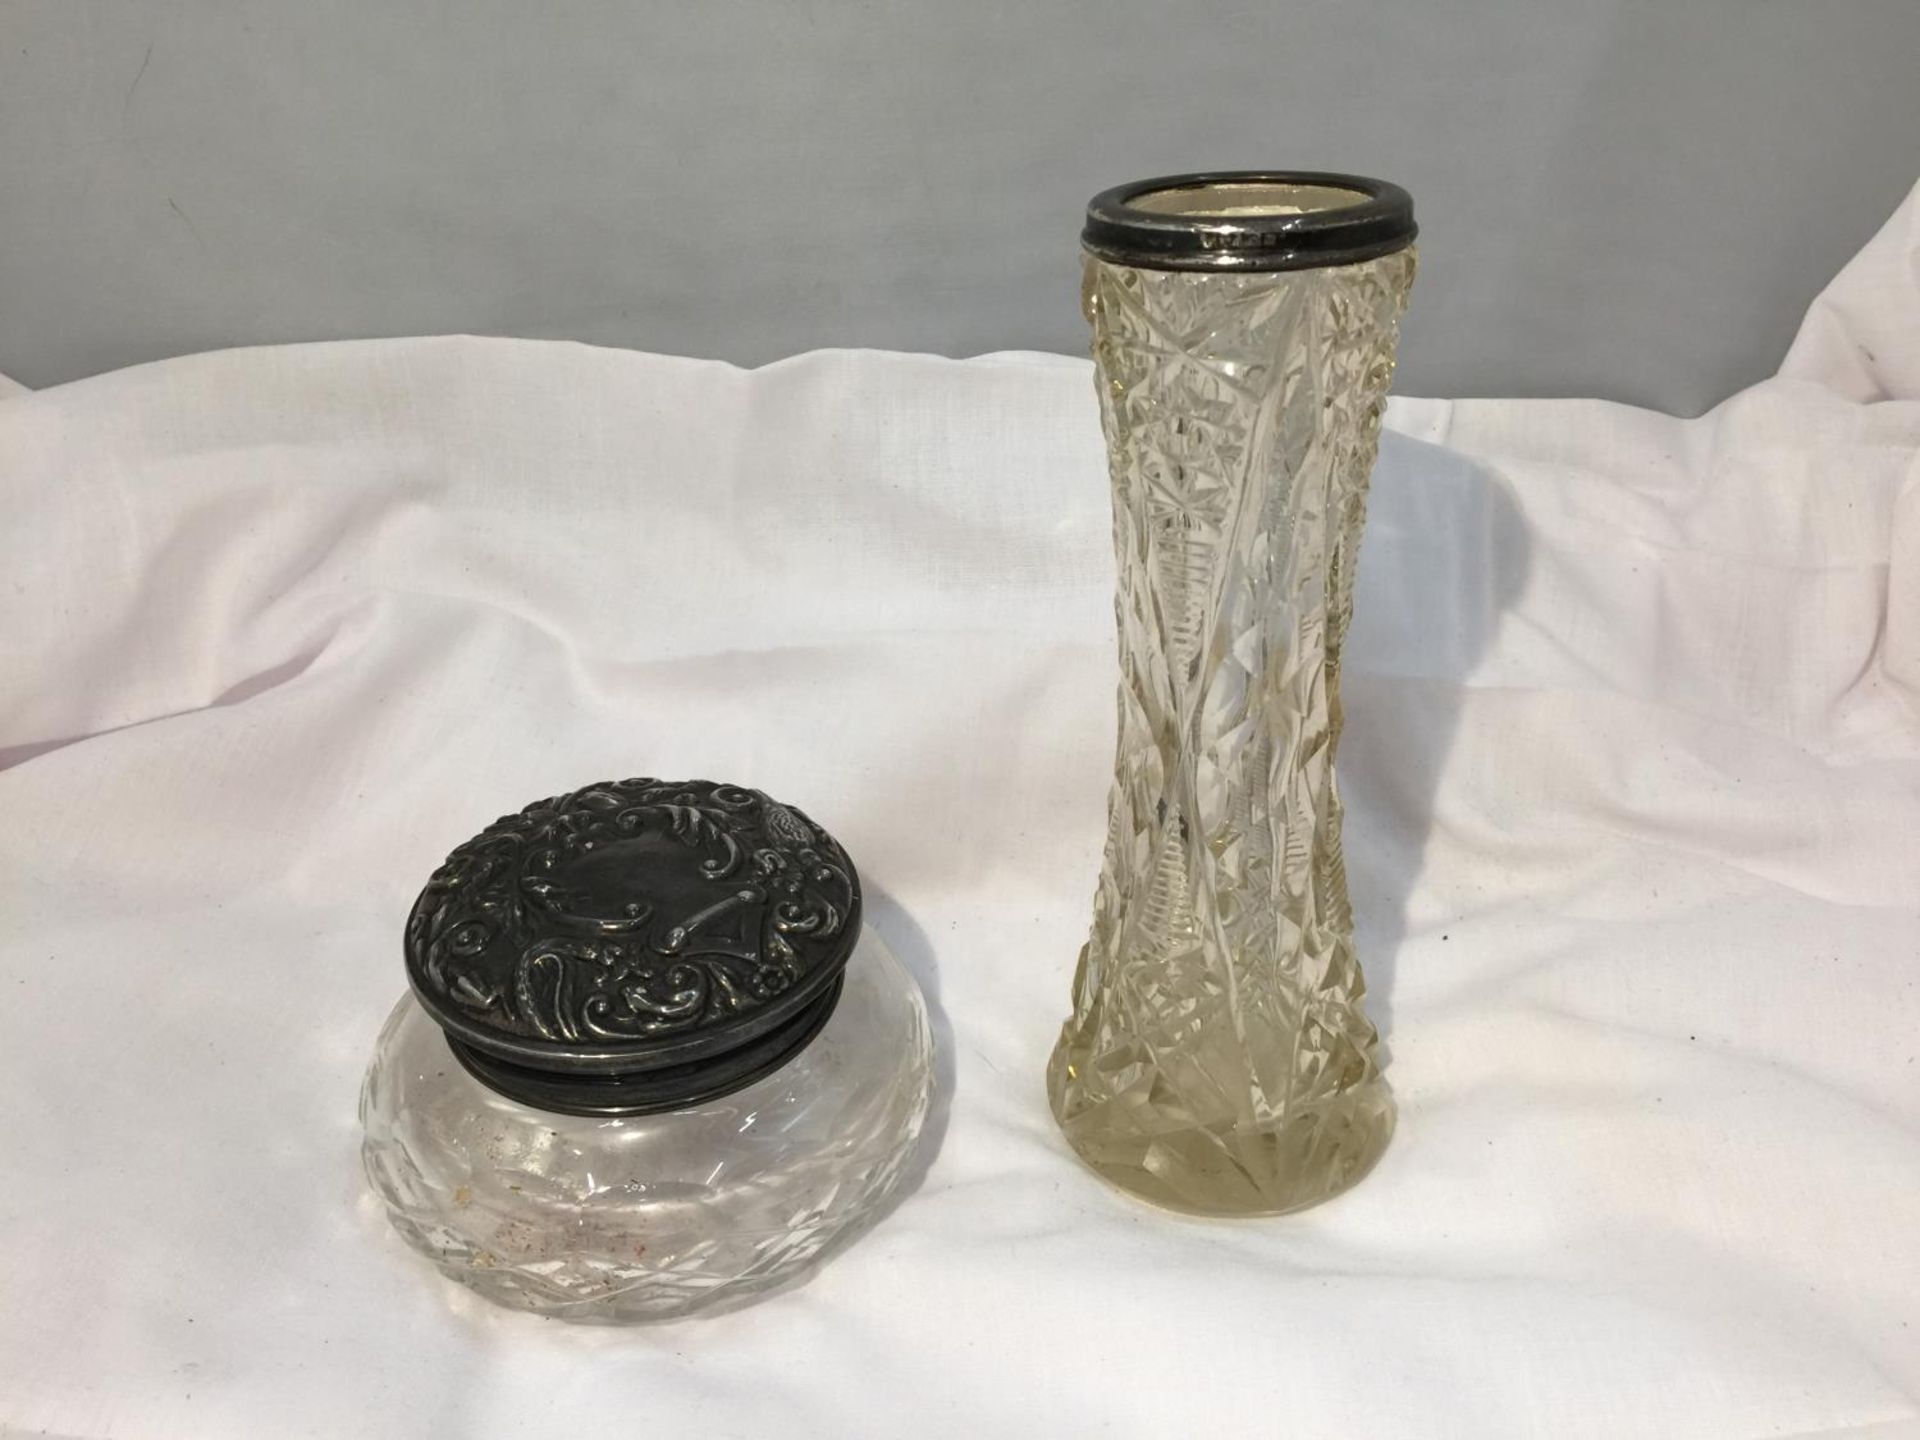 TWO CUT GLASS ITEMS ONE A JAR WITH AN ORNATE HALLMARKED BIRMINGHAM SILVER TOP AND A VASE WITH A